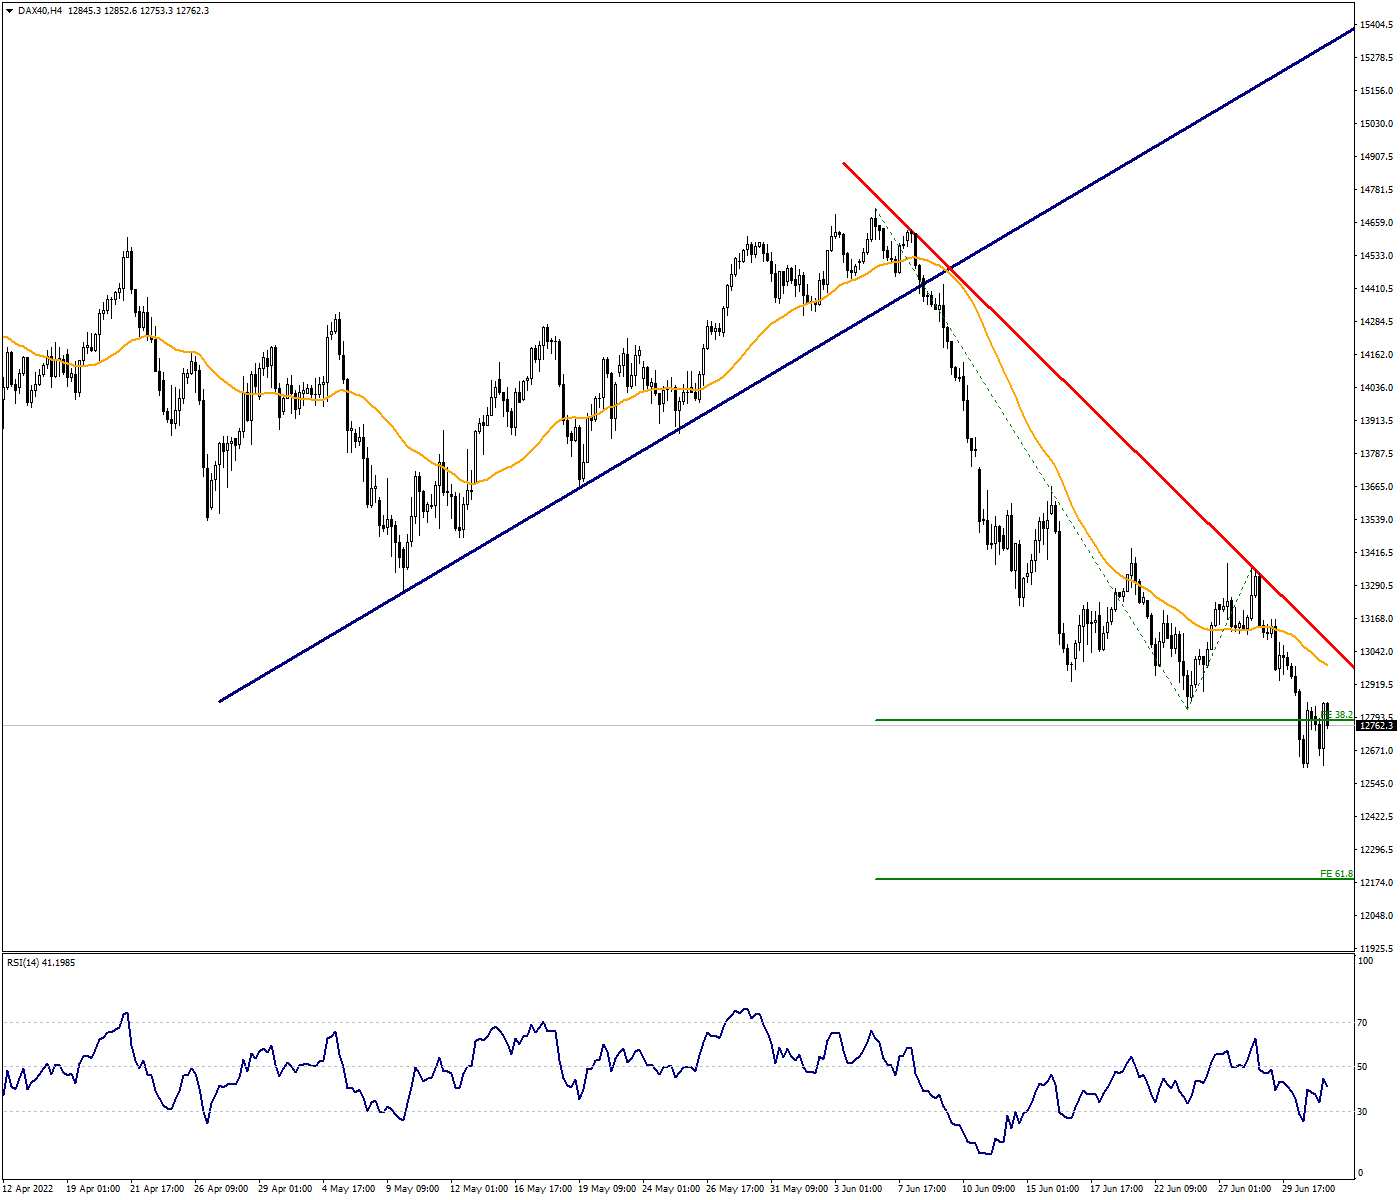 DAX40:Further Downward Movements in the Index May Come